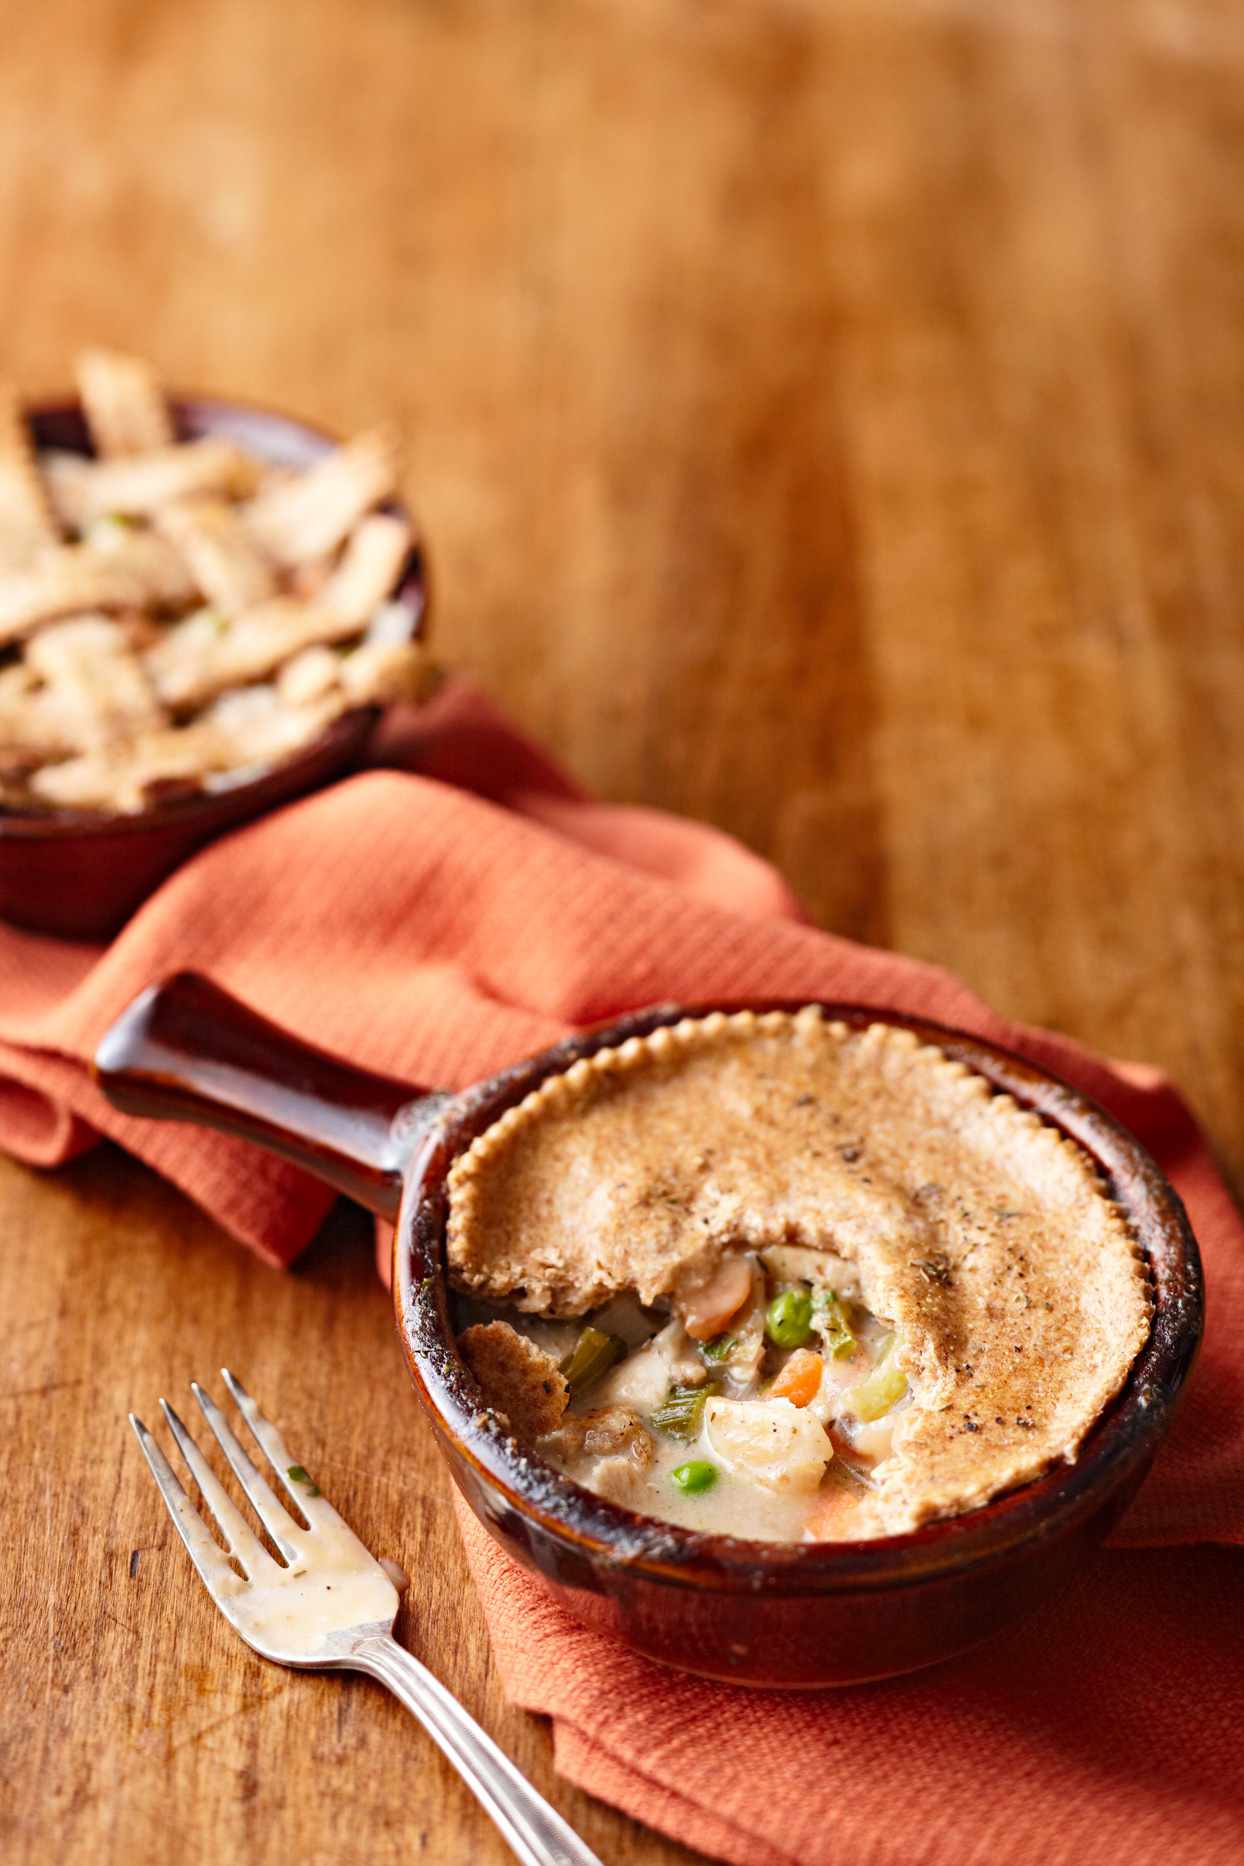 Chicken Pot Pie for Two